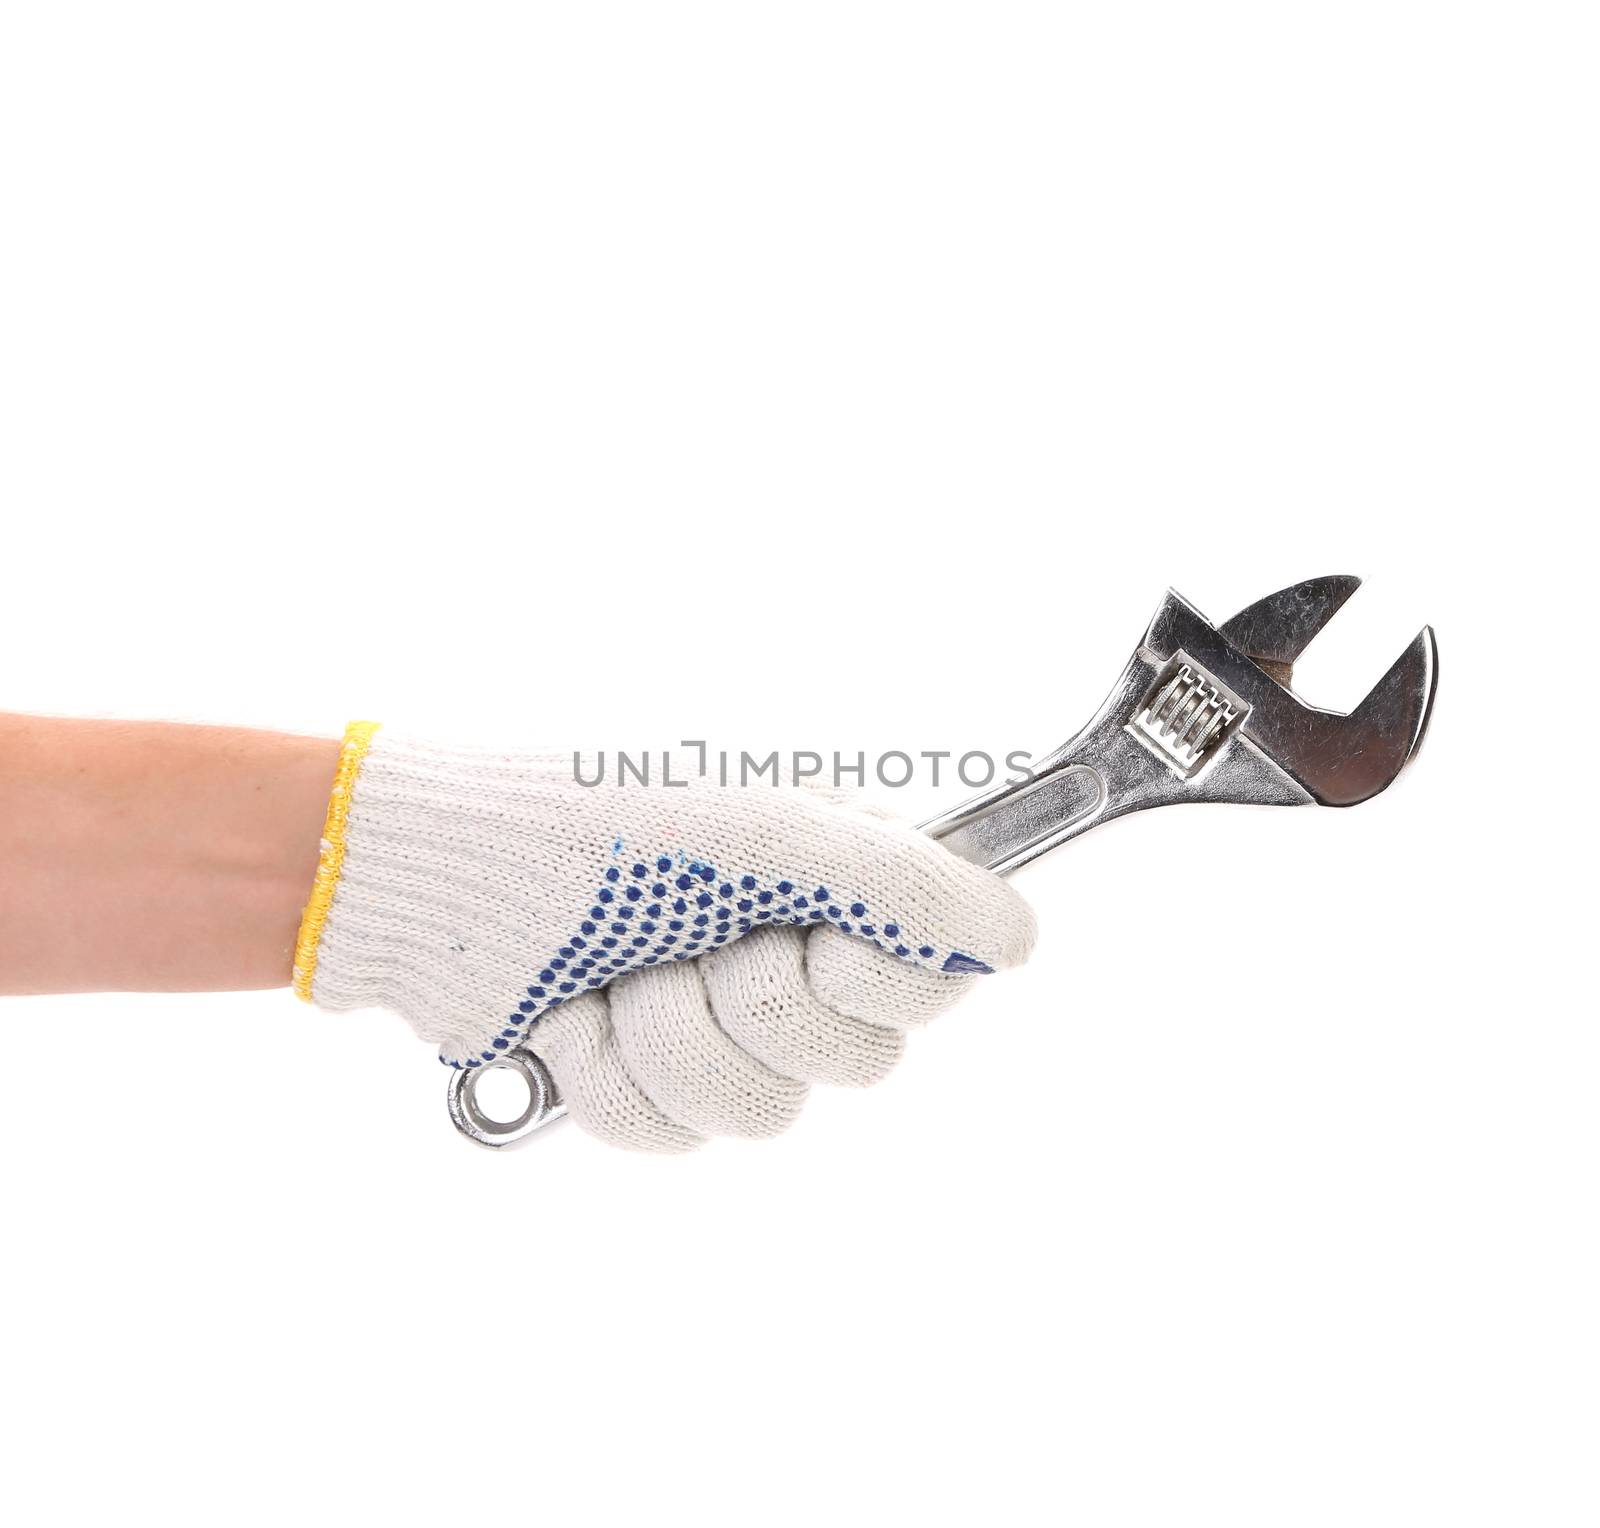 Hand in gloves holding adjustable wrench. Isolated on a white background.